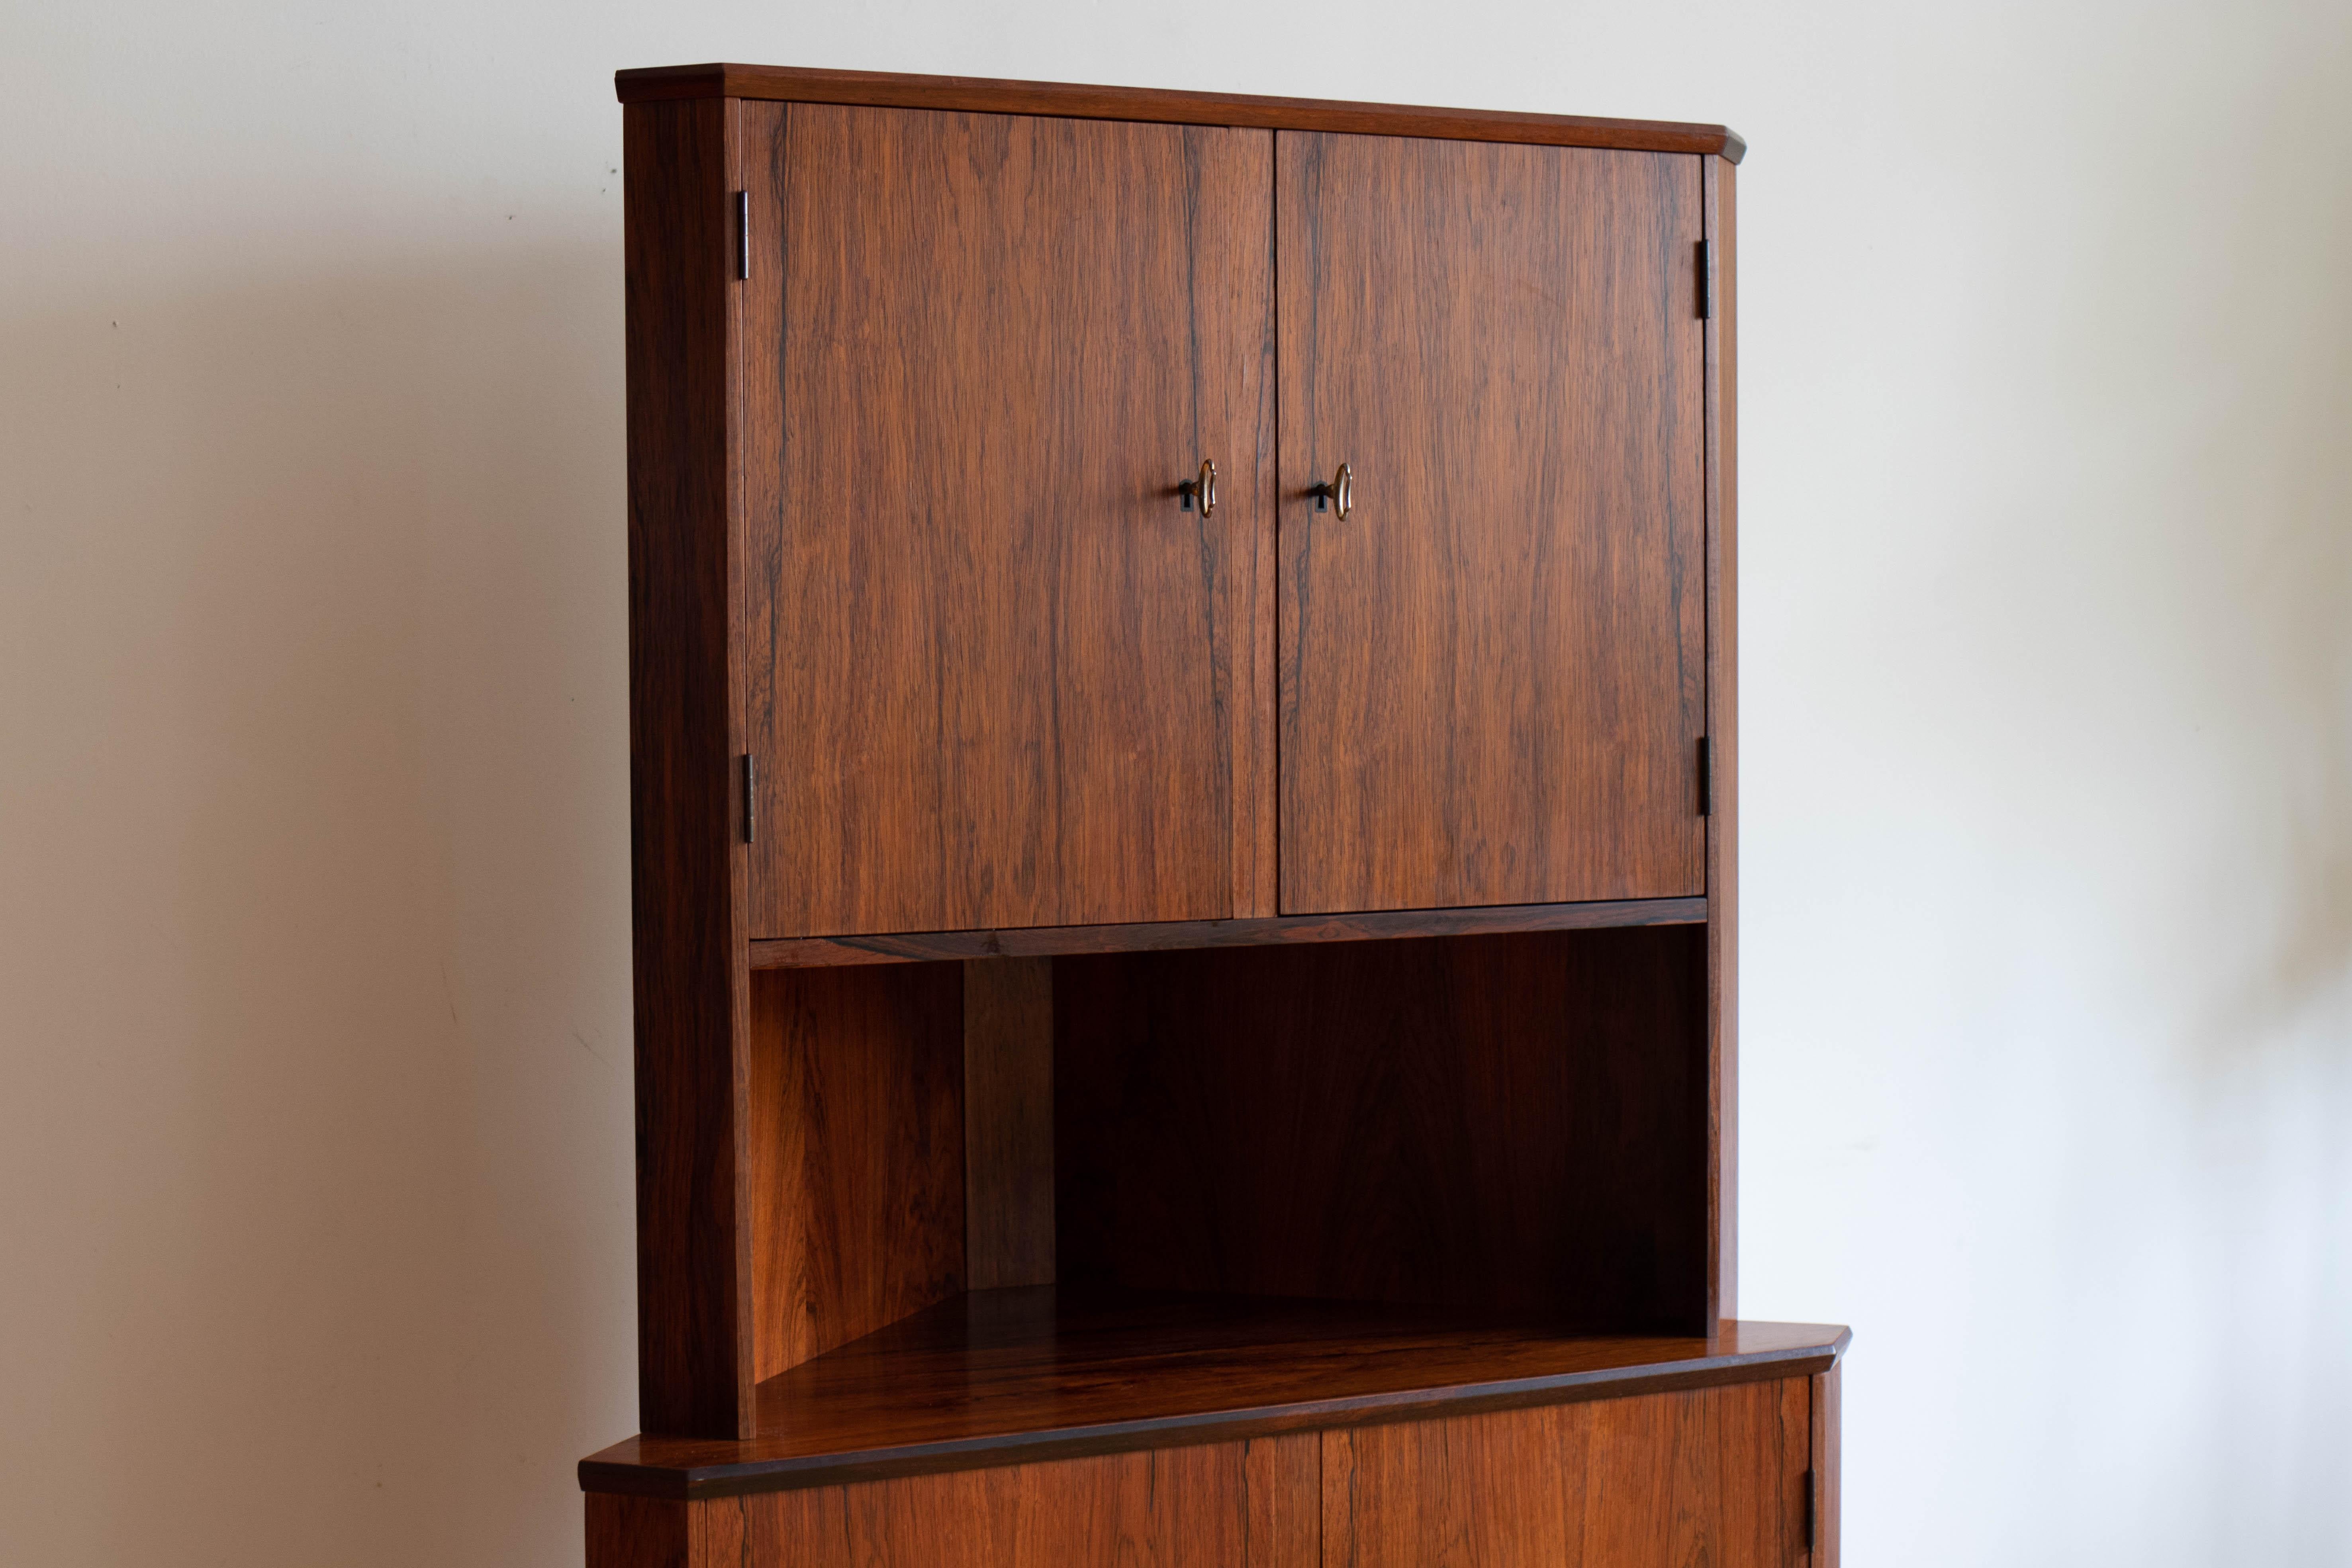 Scandinavian Mid-Century Modern rosewood corner cabinet.
Just imported from Copenhagen, Denmark.
Two double locking cabinet doors.
Includes two vintage brass keys.
Adjustable triangle shelving, not usually seen in corner units. 
Excellent vintage